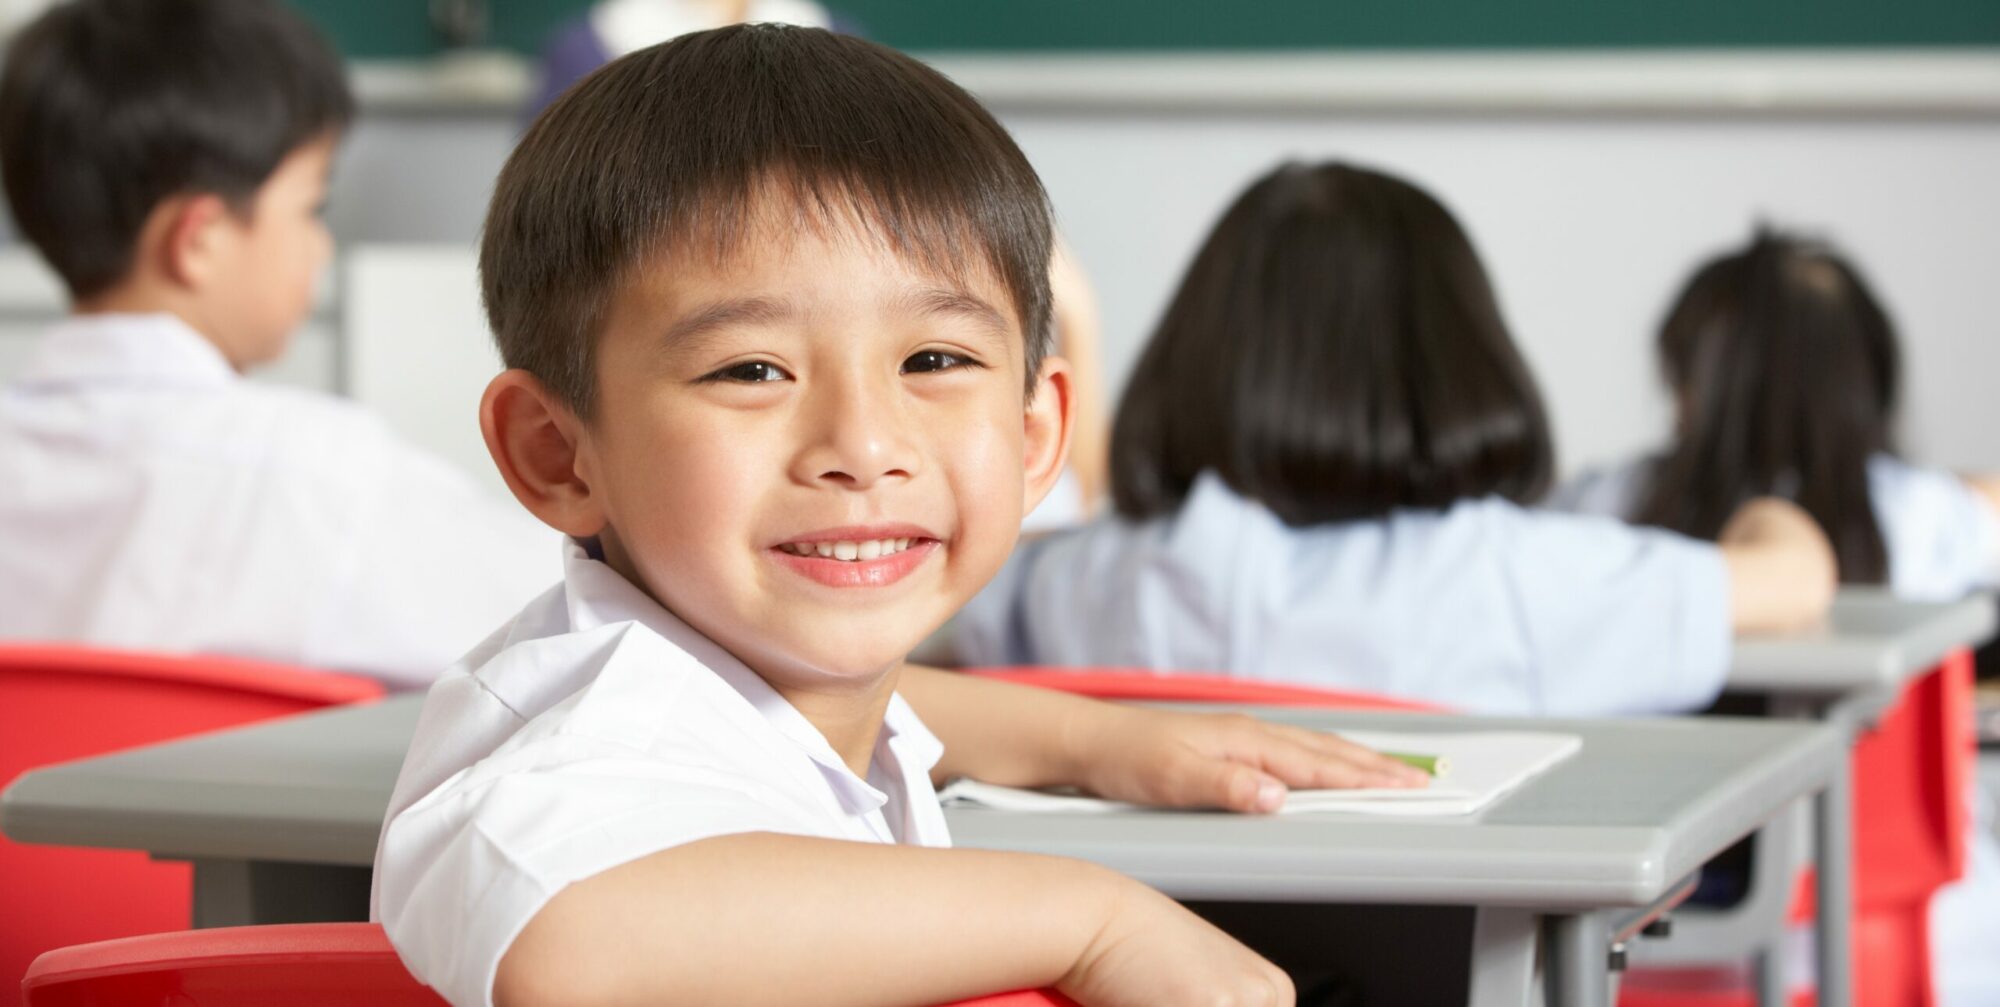 Young smiling child in classroom sitting at a desk with other students.